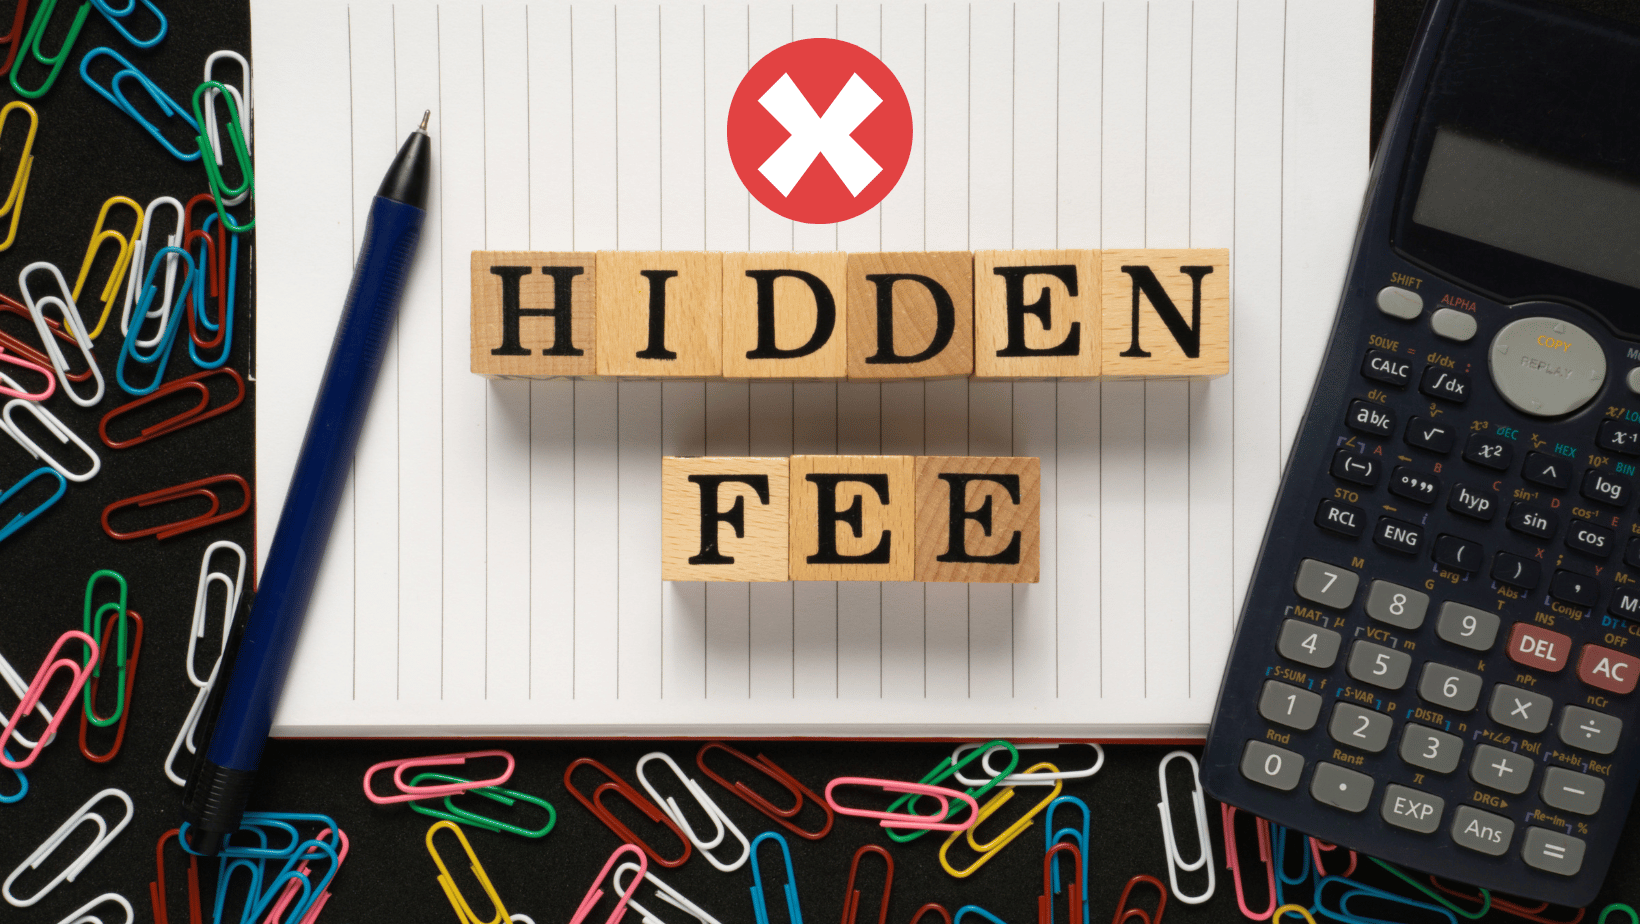 Hidden fees and additional cost on rent collection, tenant screenings, maintenance team fees or marketing fees.